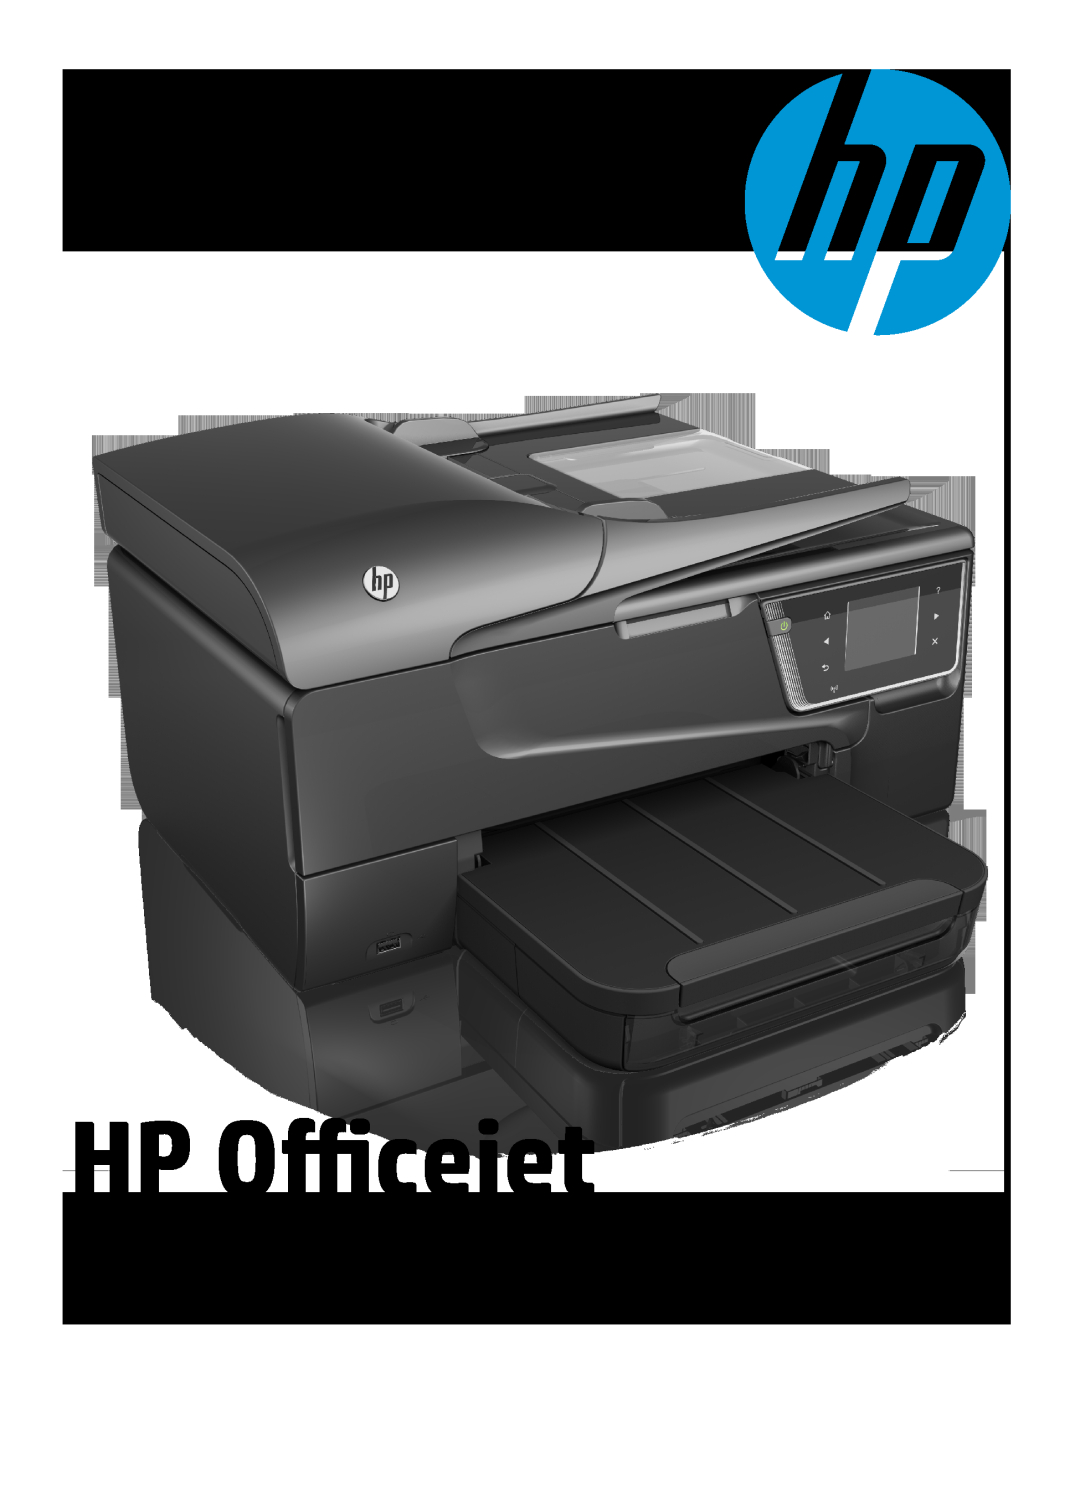 HP 6600 - H7 manual HP Oﬃcejet, User Guide 